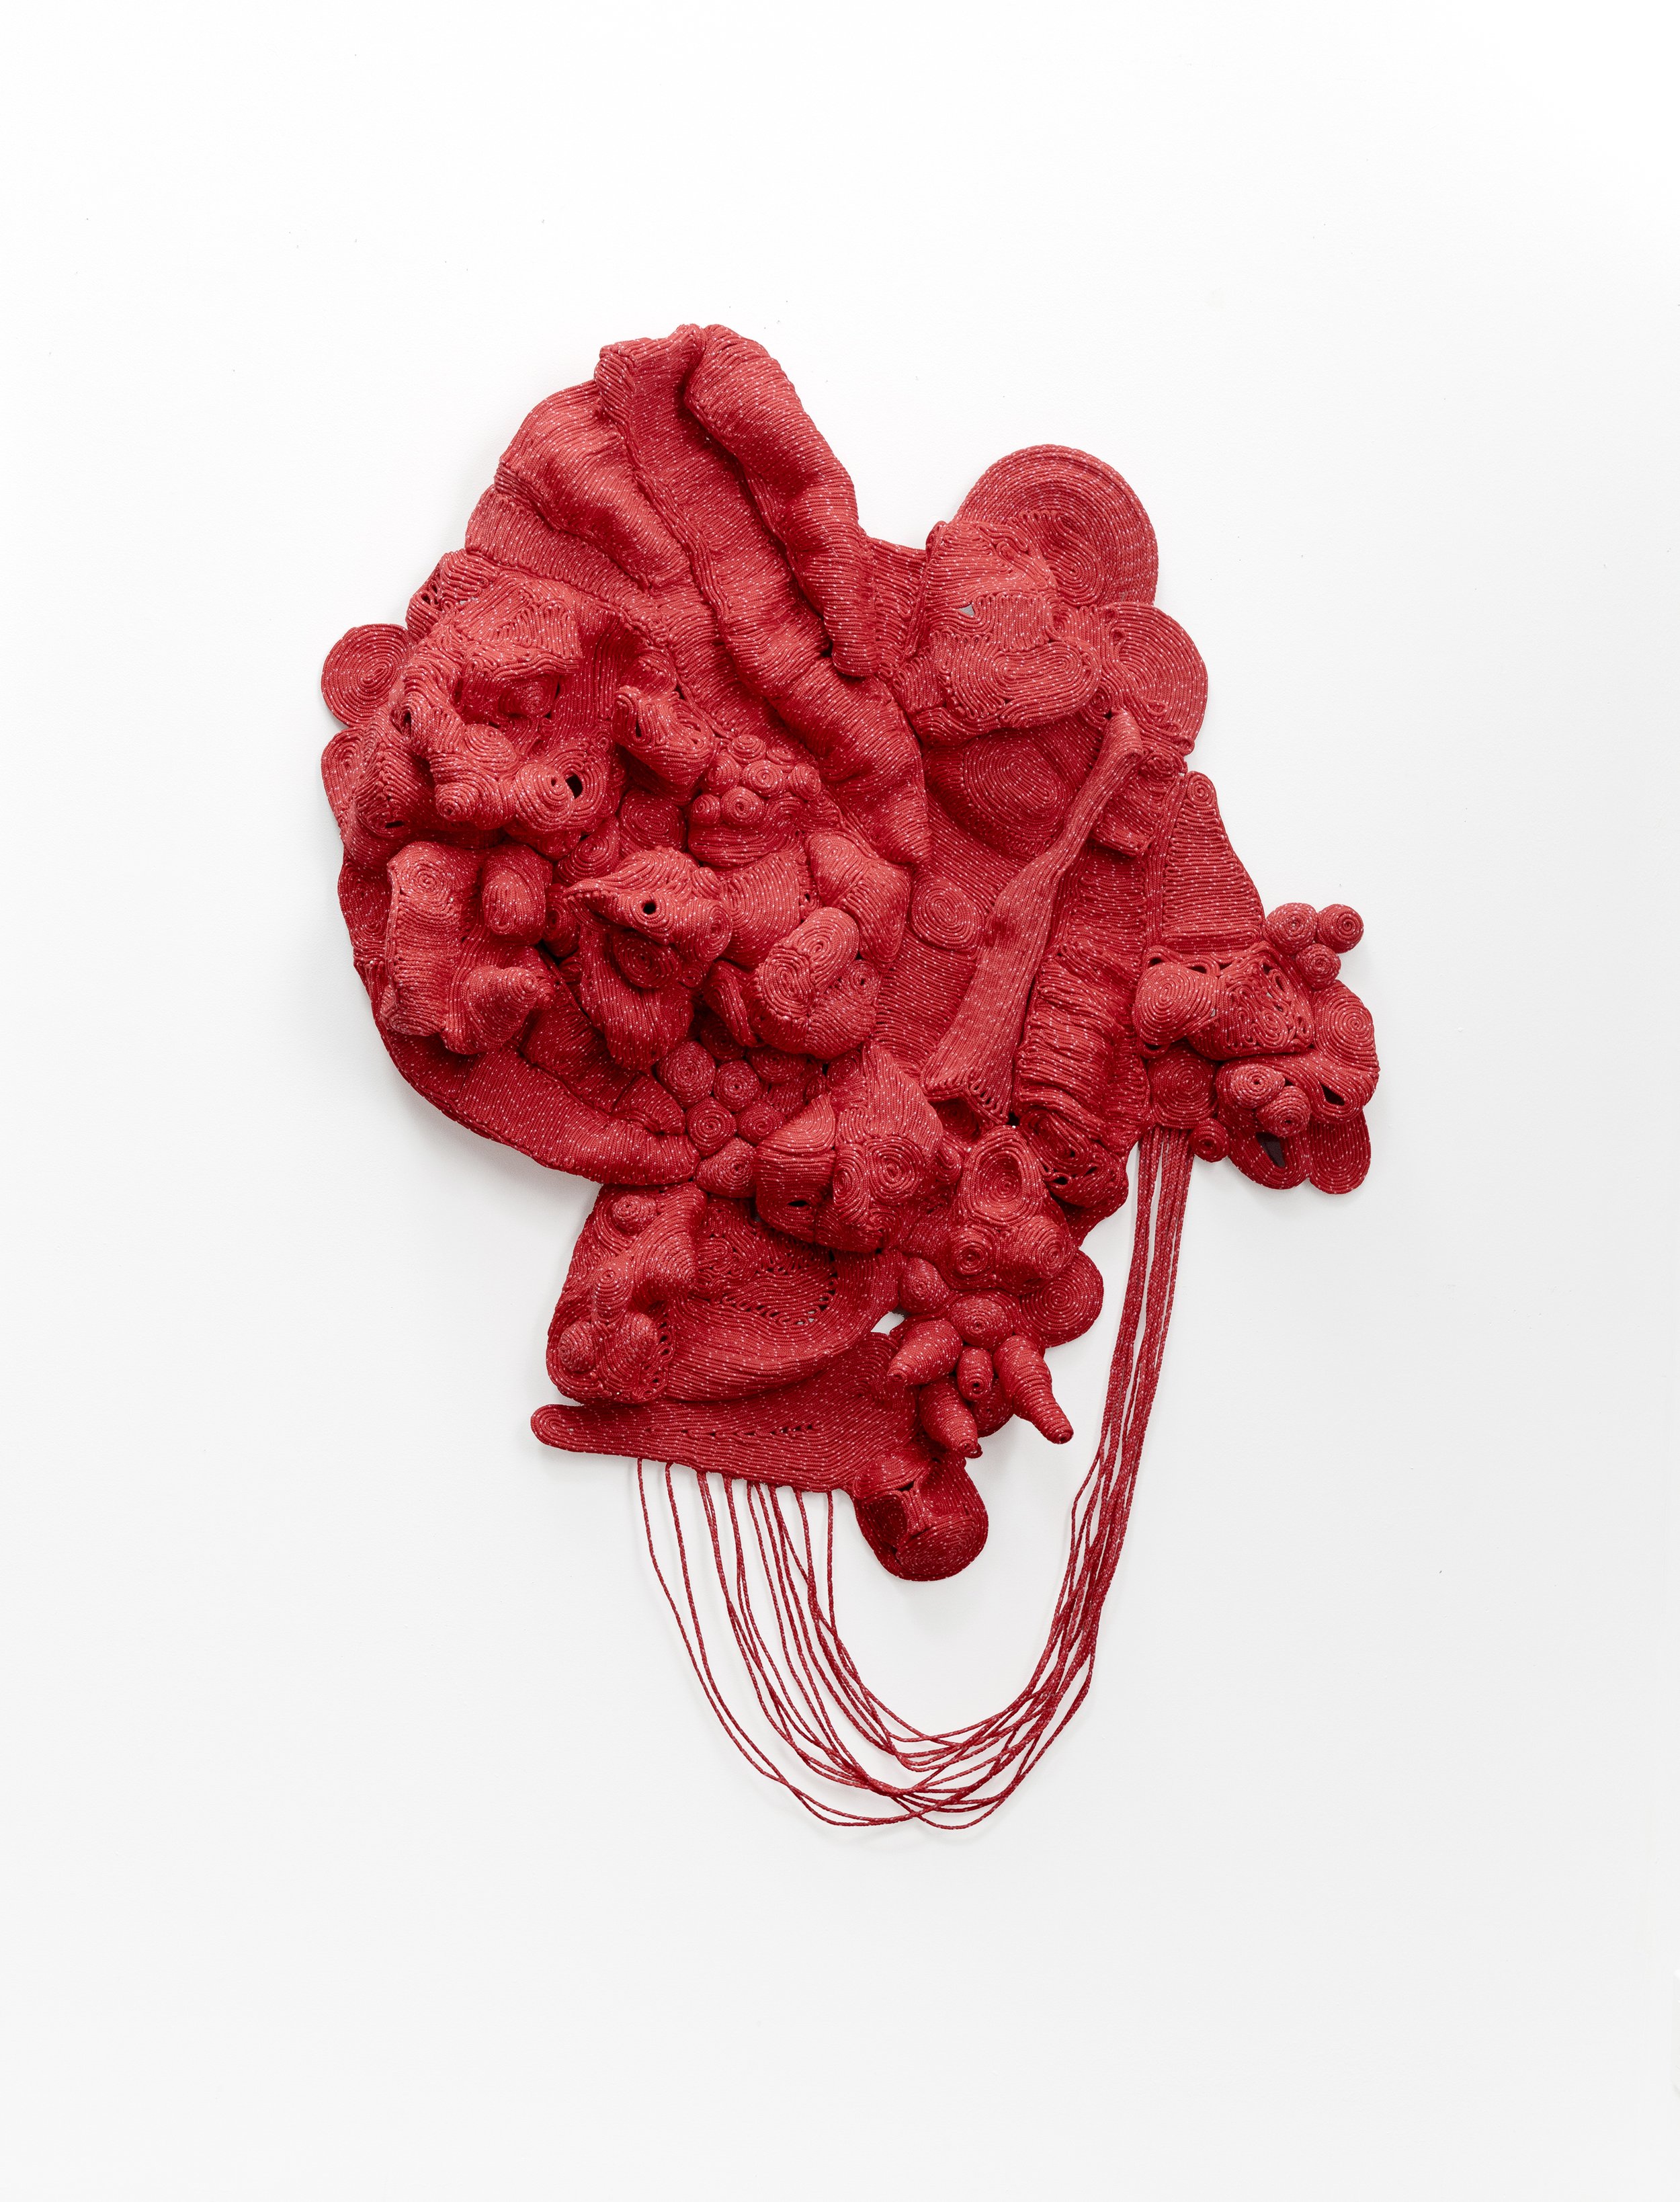   red coil   2023 polypropylene rope, thread 60 x 42 inches 